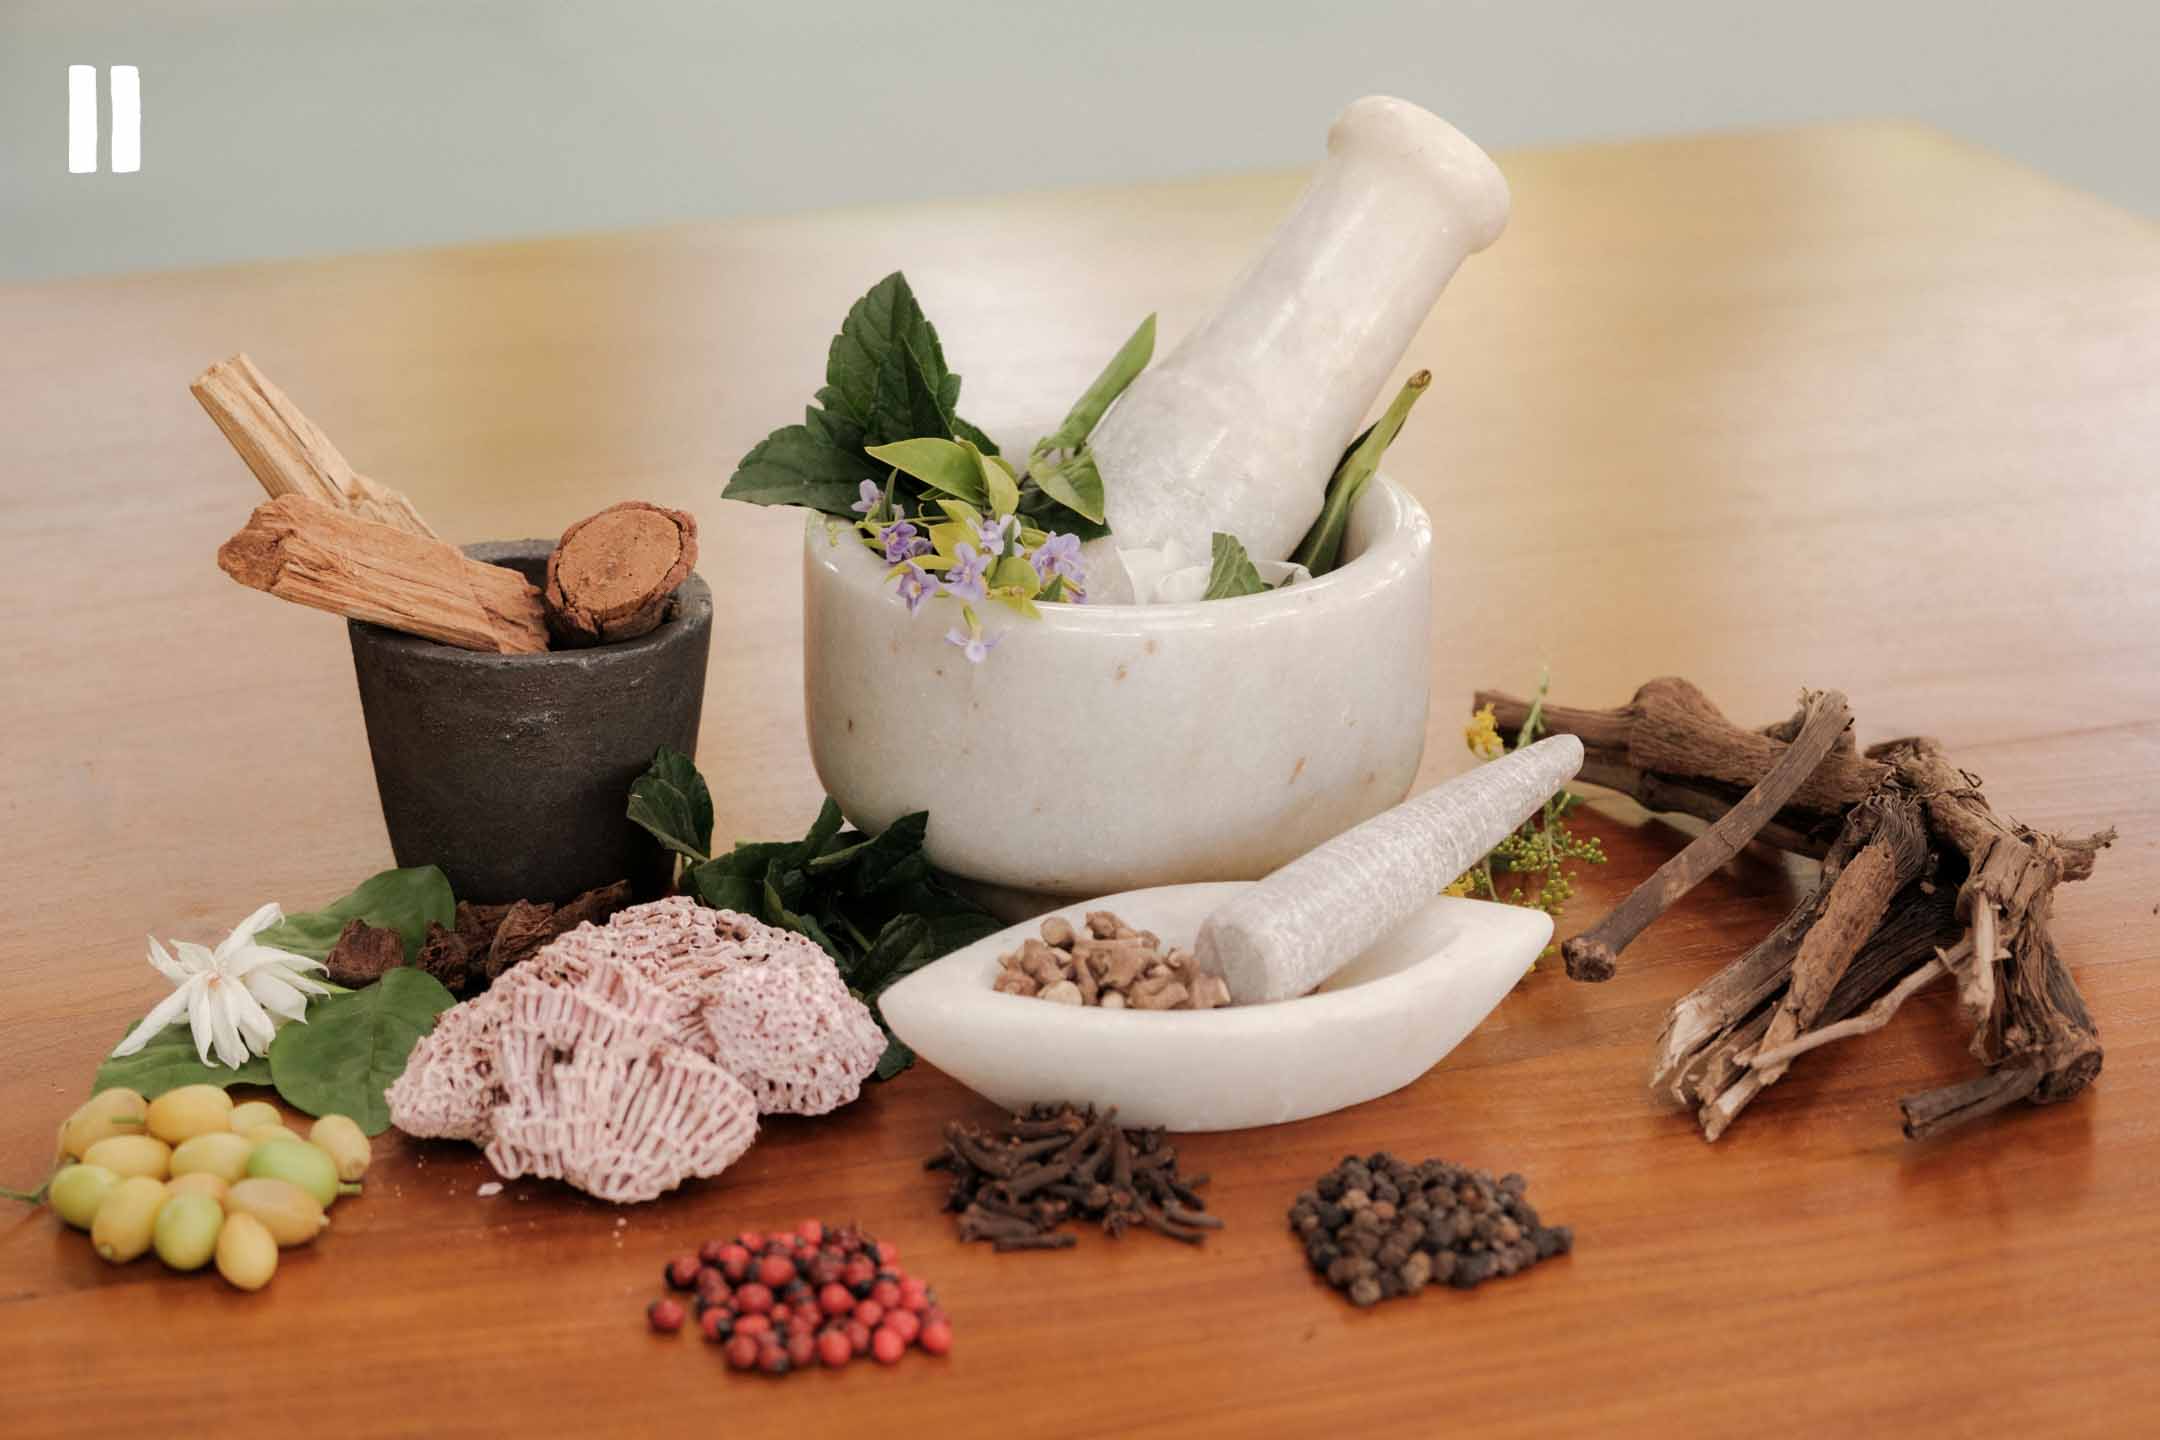 Raga Svara is the Best Ayurveda Therapy Center in India